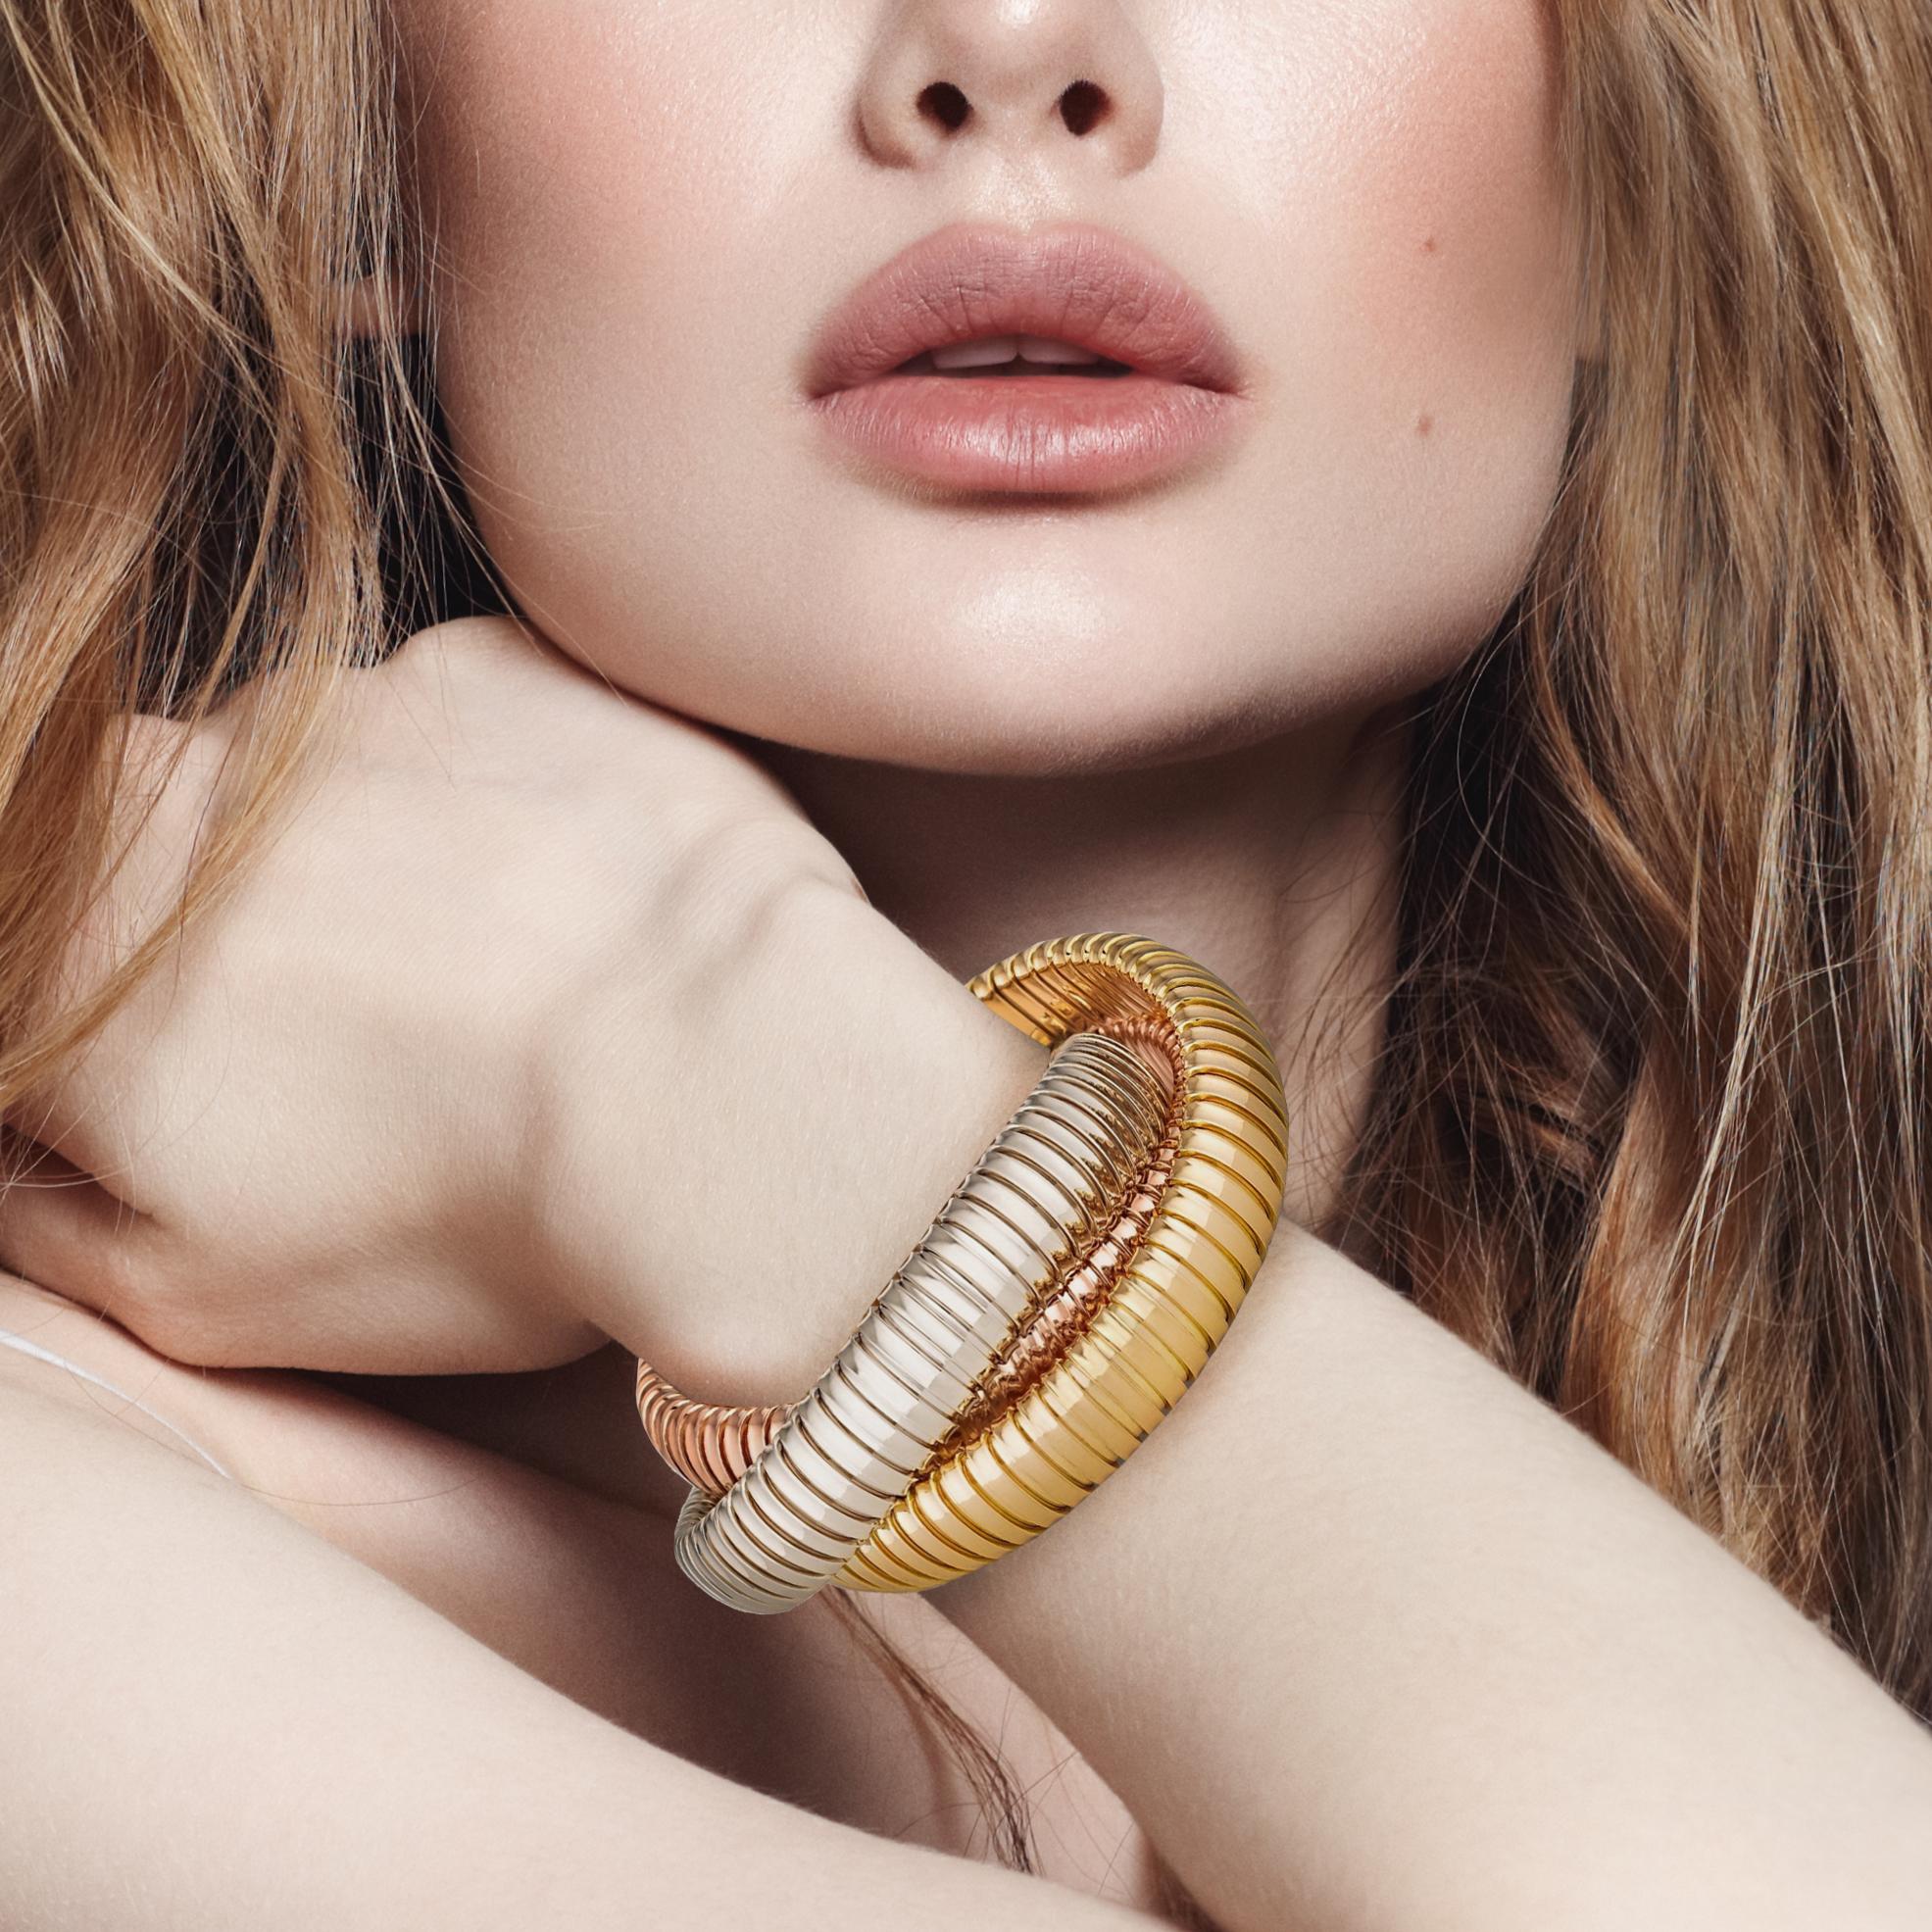 With a timeless but modern style, this chic intertwined three strand 12mm tubogas rolling bangle bracelet was originally inspired by the flexible automotive gas tubing of the 1920’s.  Translated into luxurious 18 karat white, rose and yellow gold